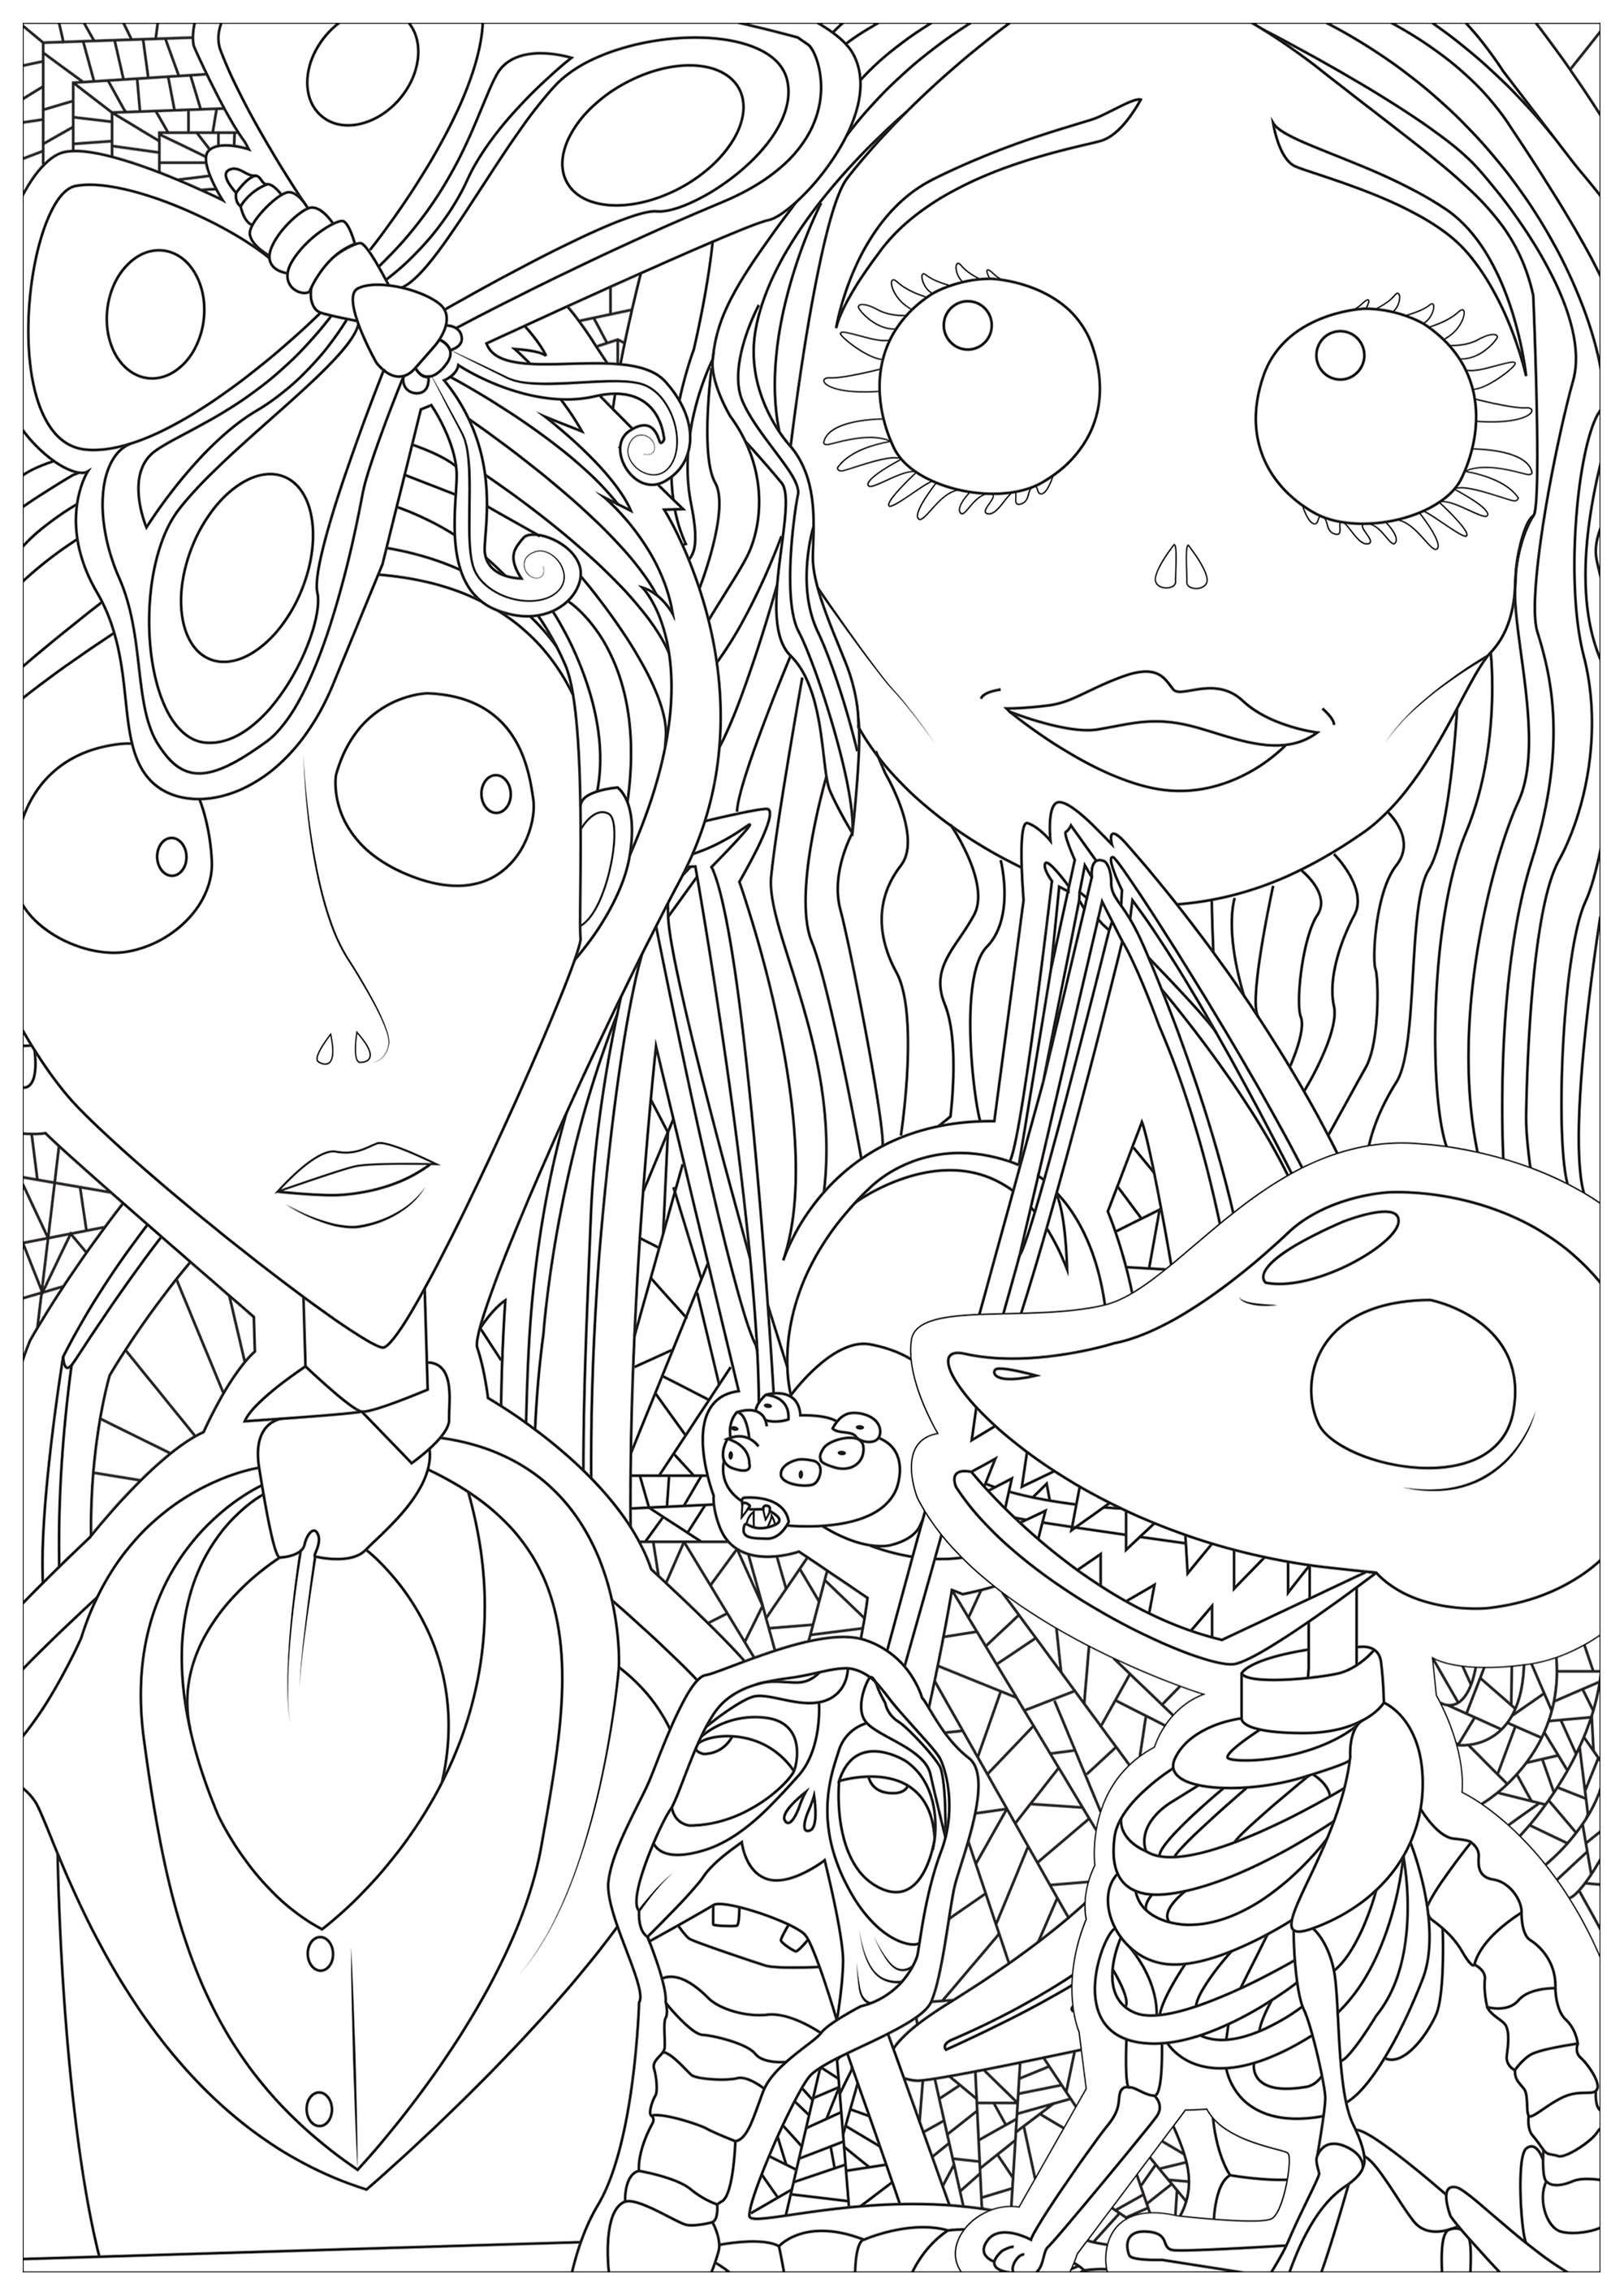 Corpse bride - Halloween Adult Coloring Pages